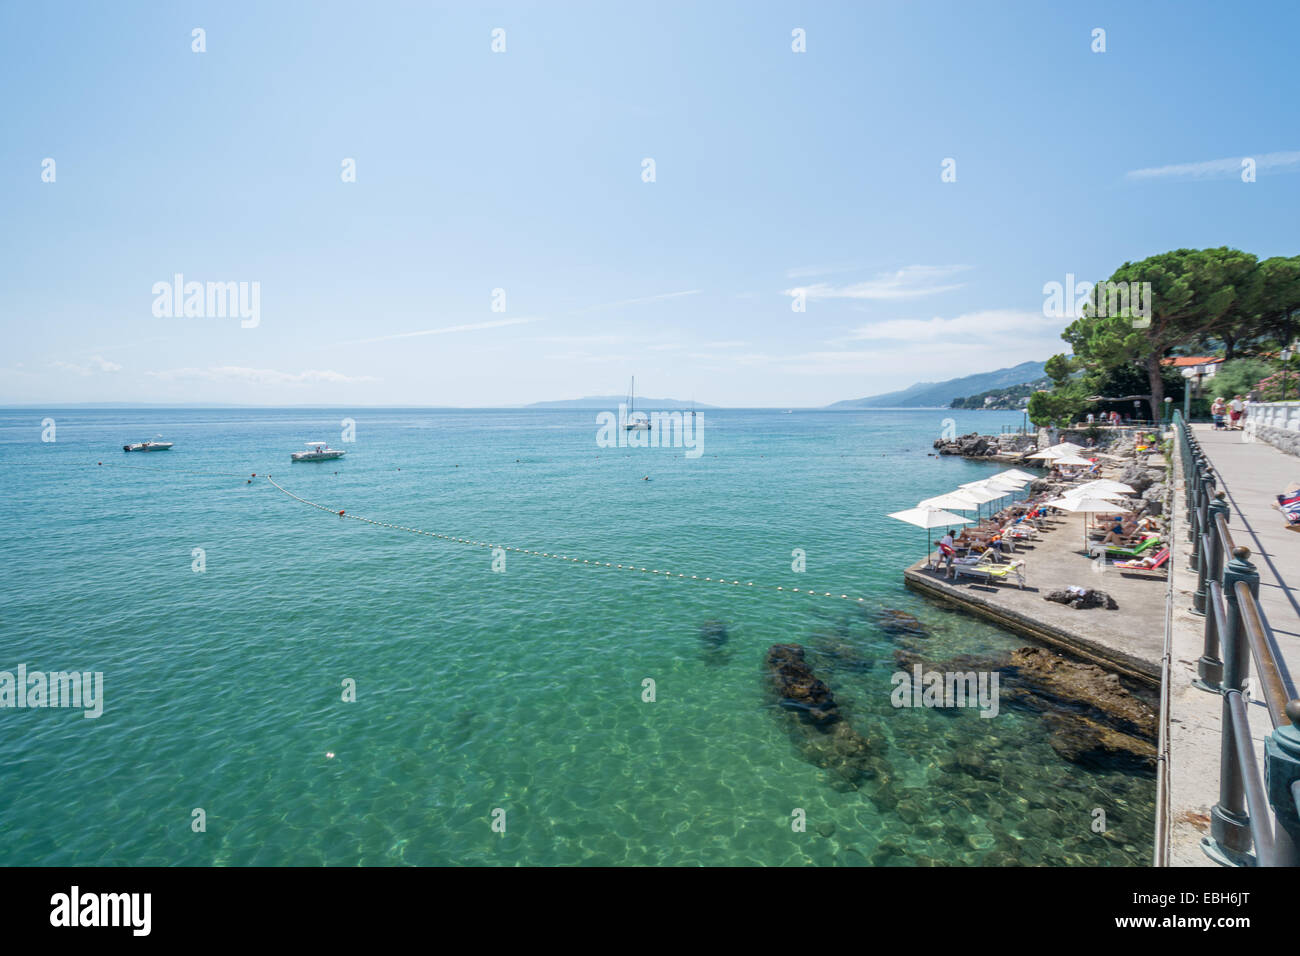 Opatija has been one of the most popular destinations for sightseeing in Croatia since the 19th century when the Habsburgs turne Stock Photo